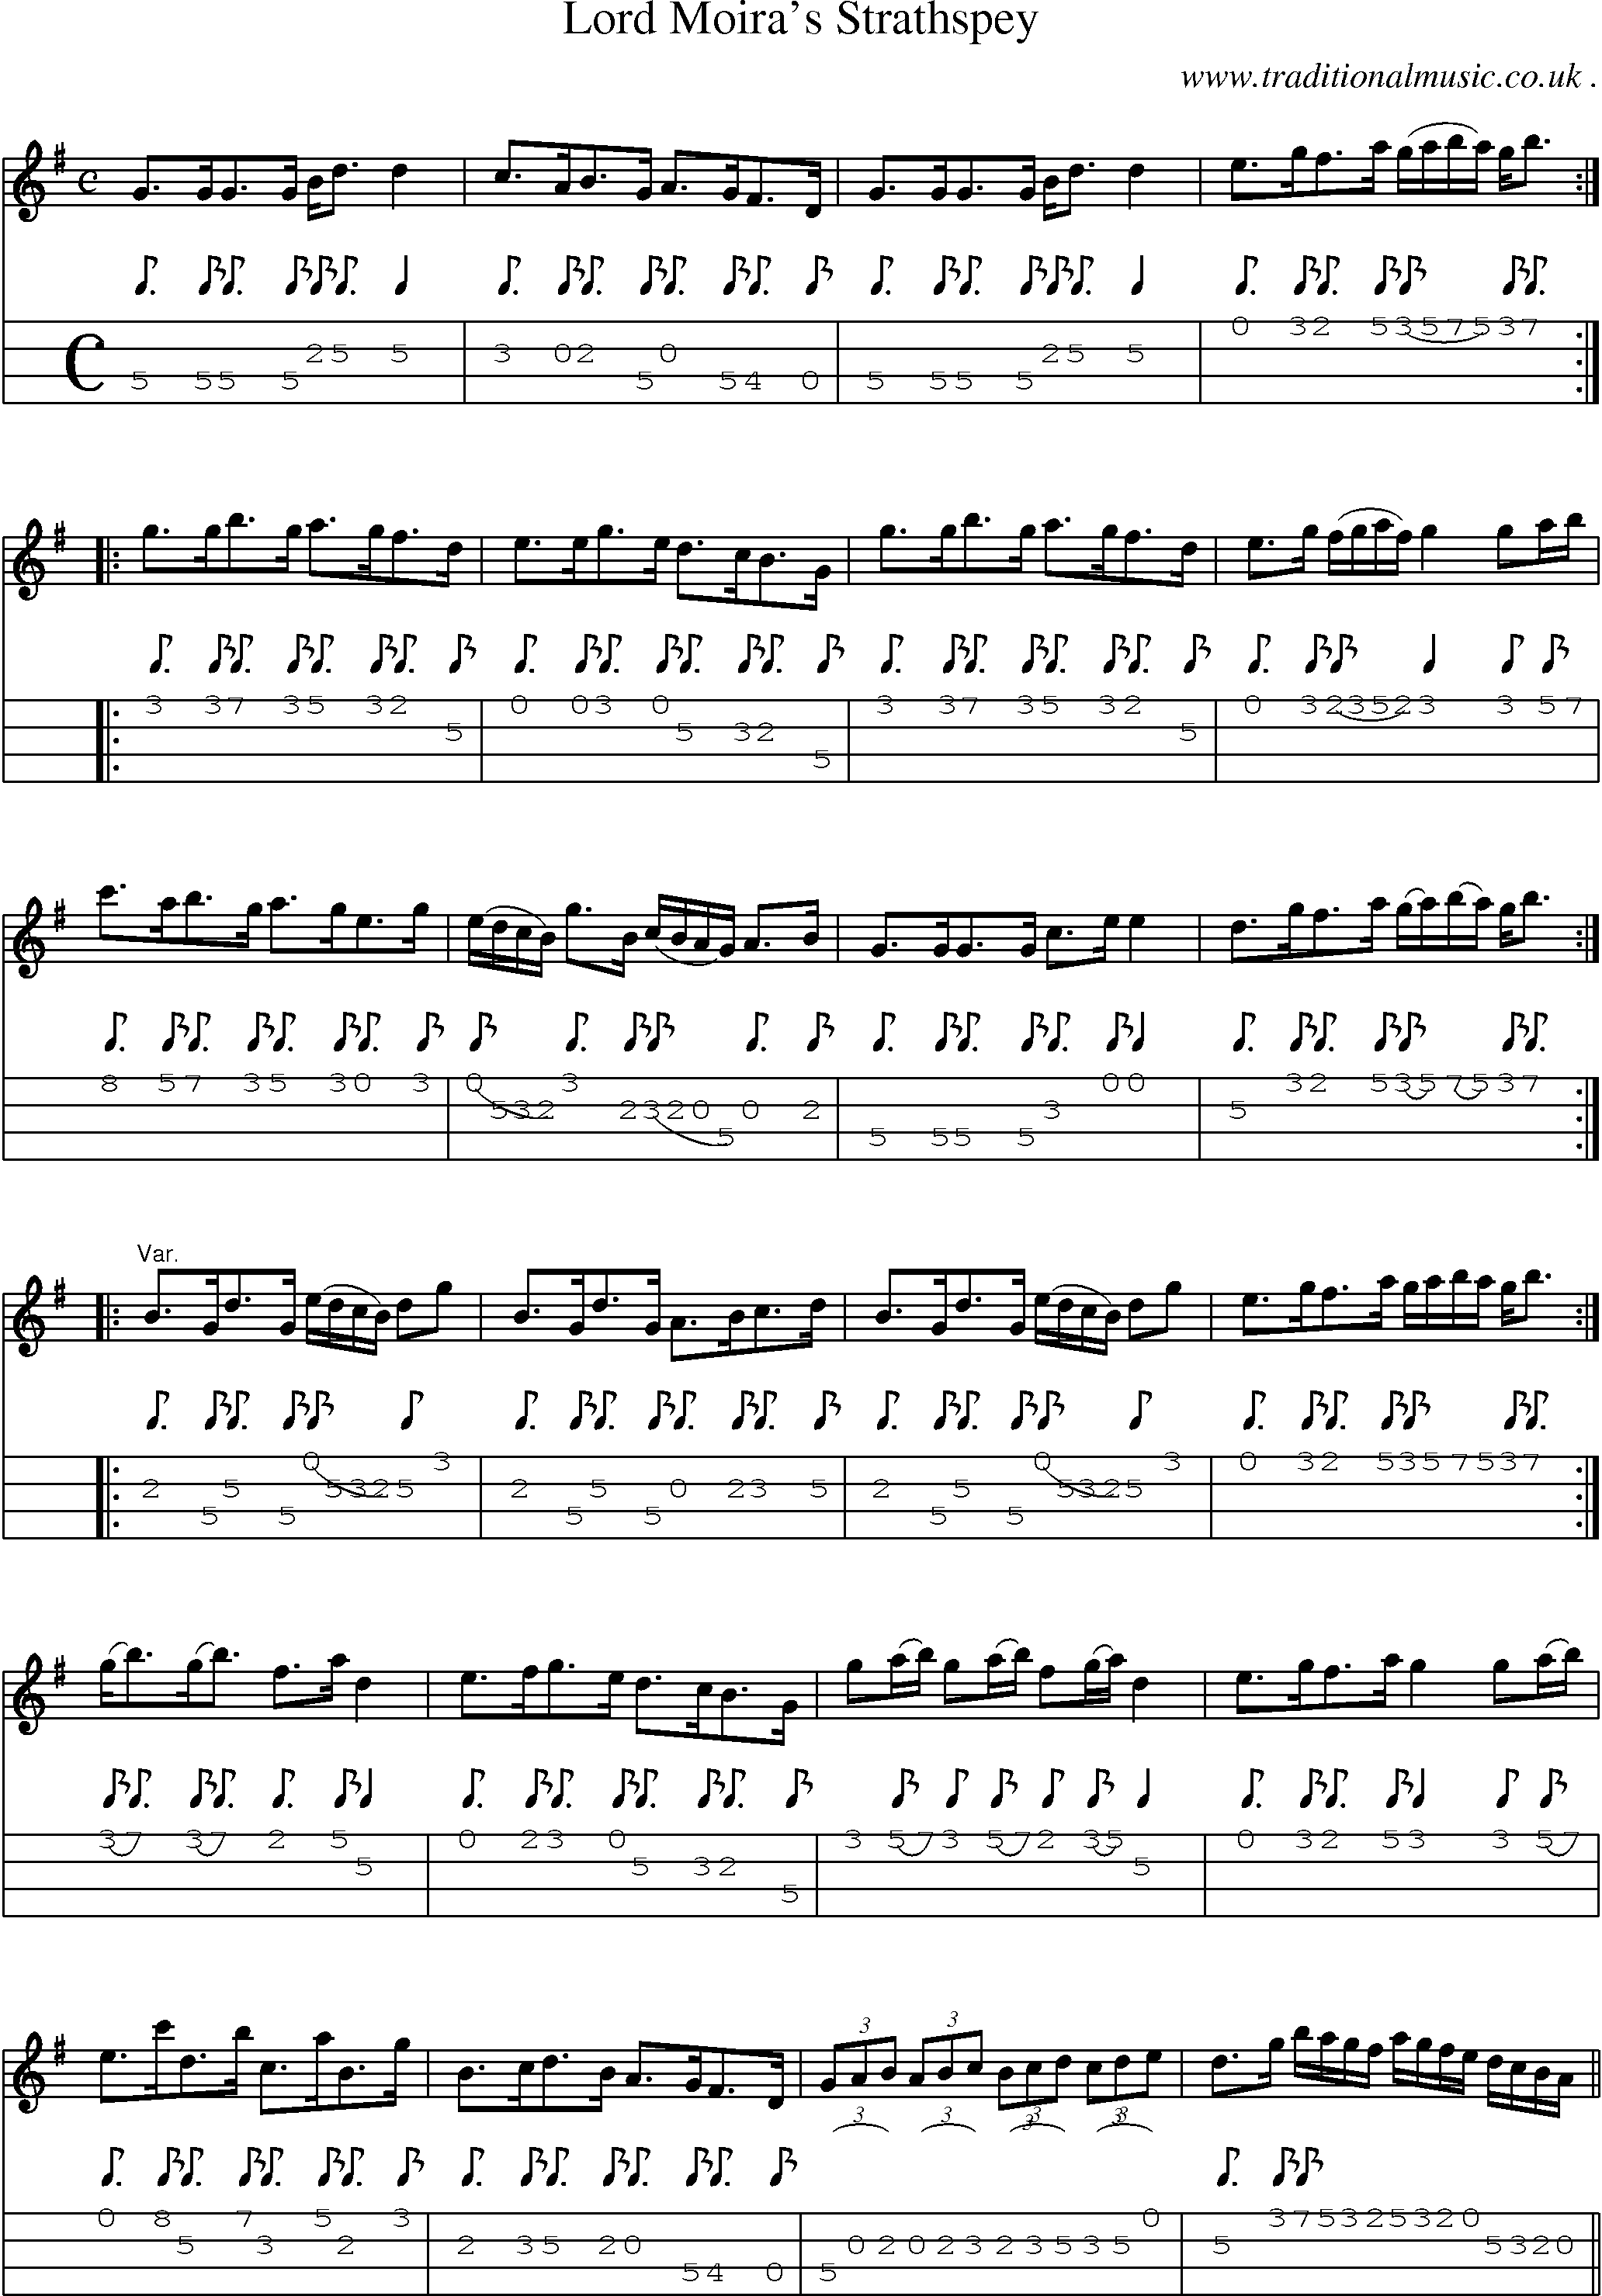 Sheet-Music and Mandolin Tabs for Lord Moiras Strathspey